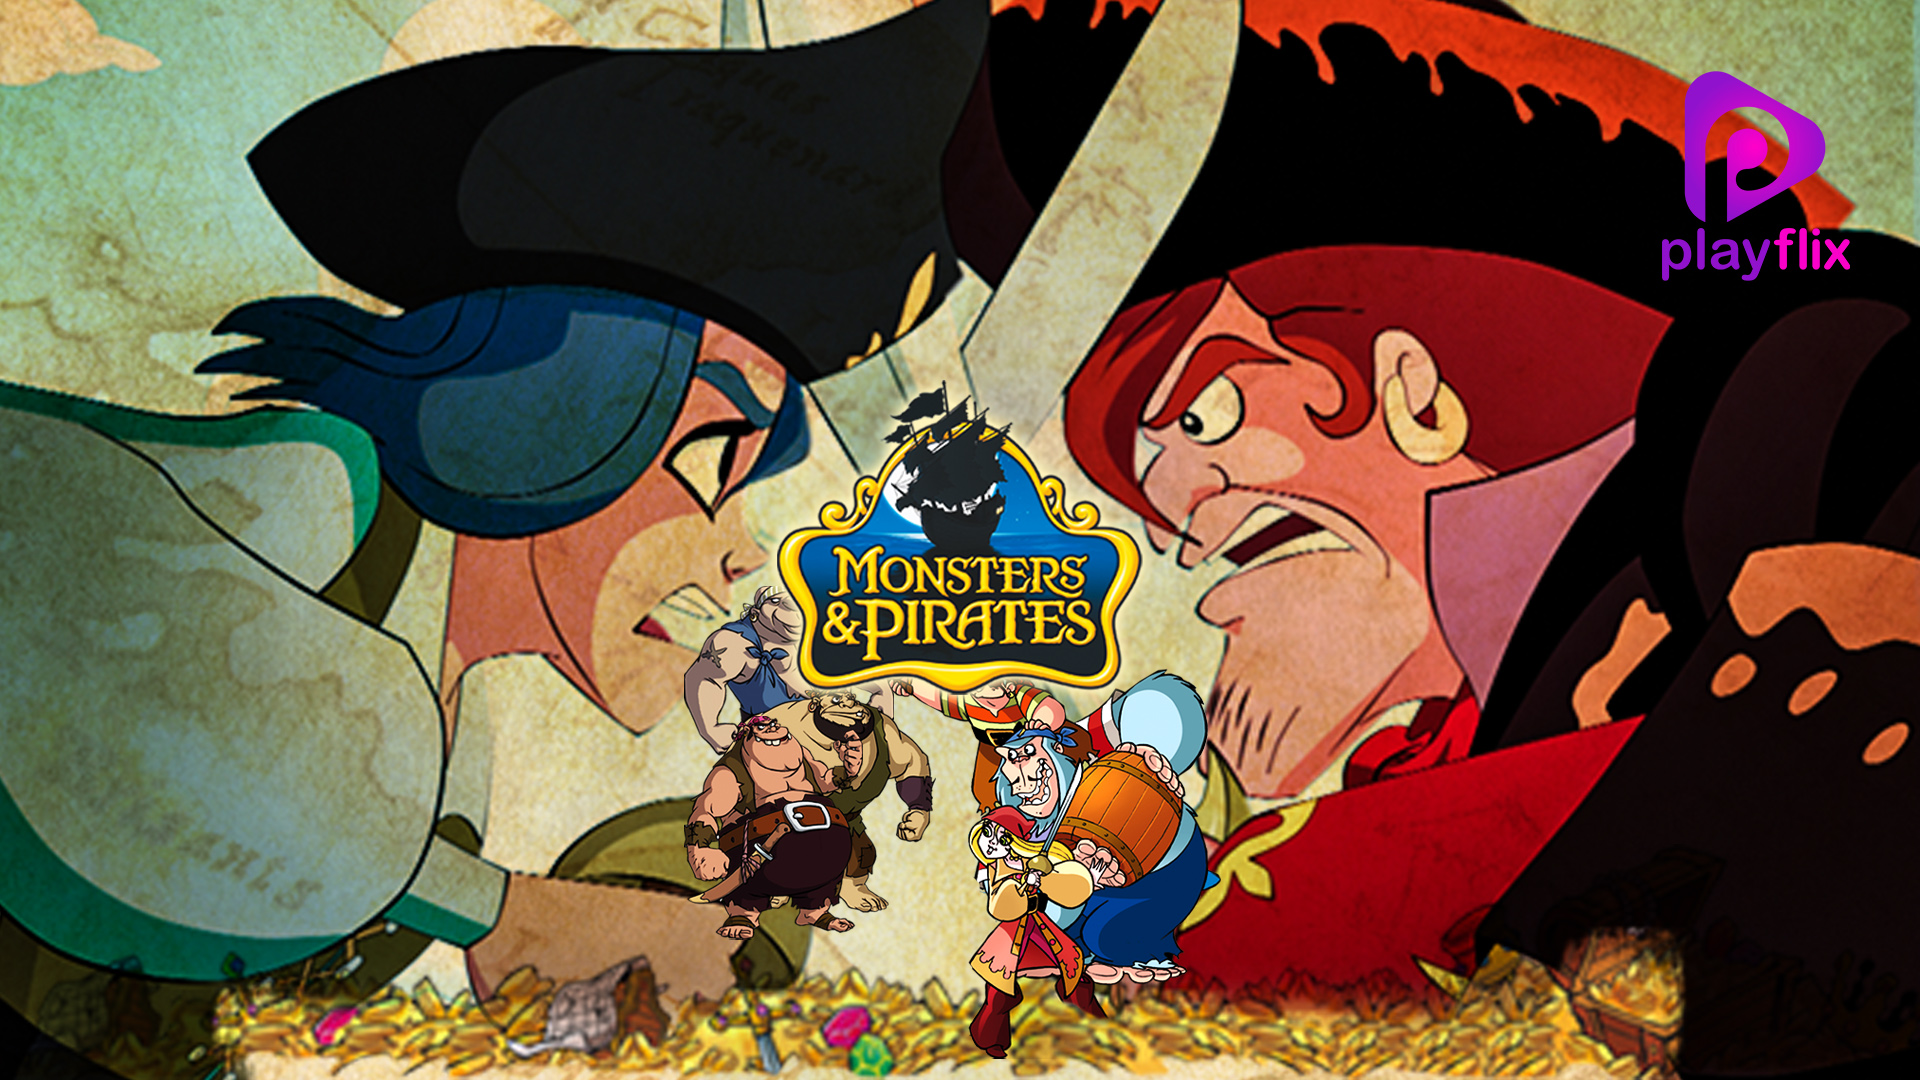 Monsters & Piraters